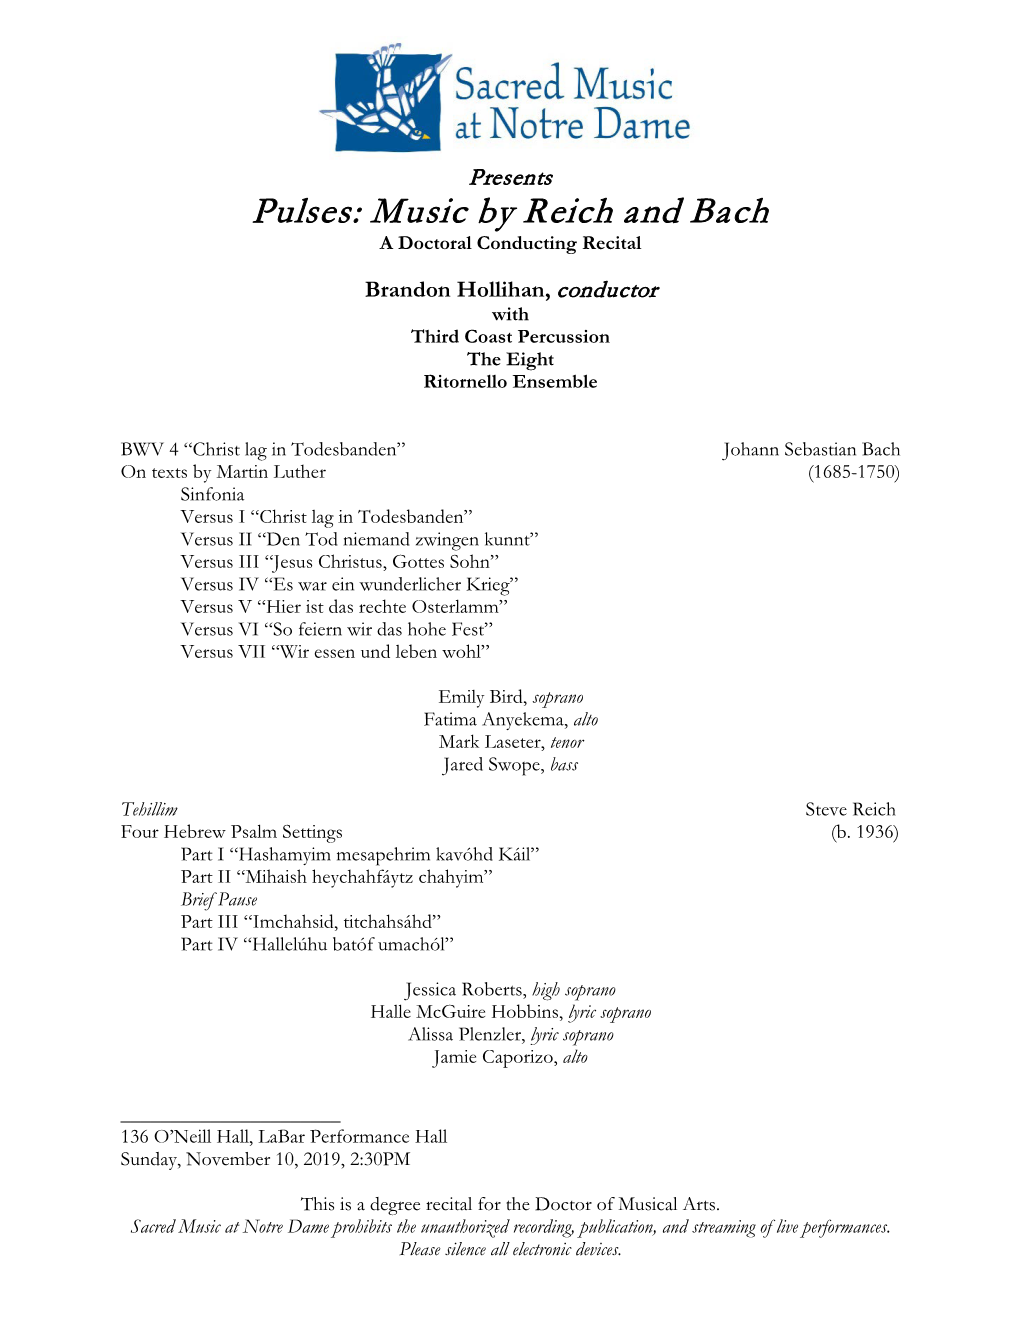 Music by Reich and Bach a Doctoral Conducting Recital